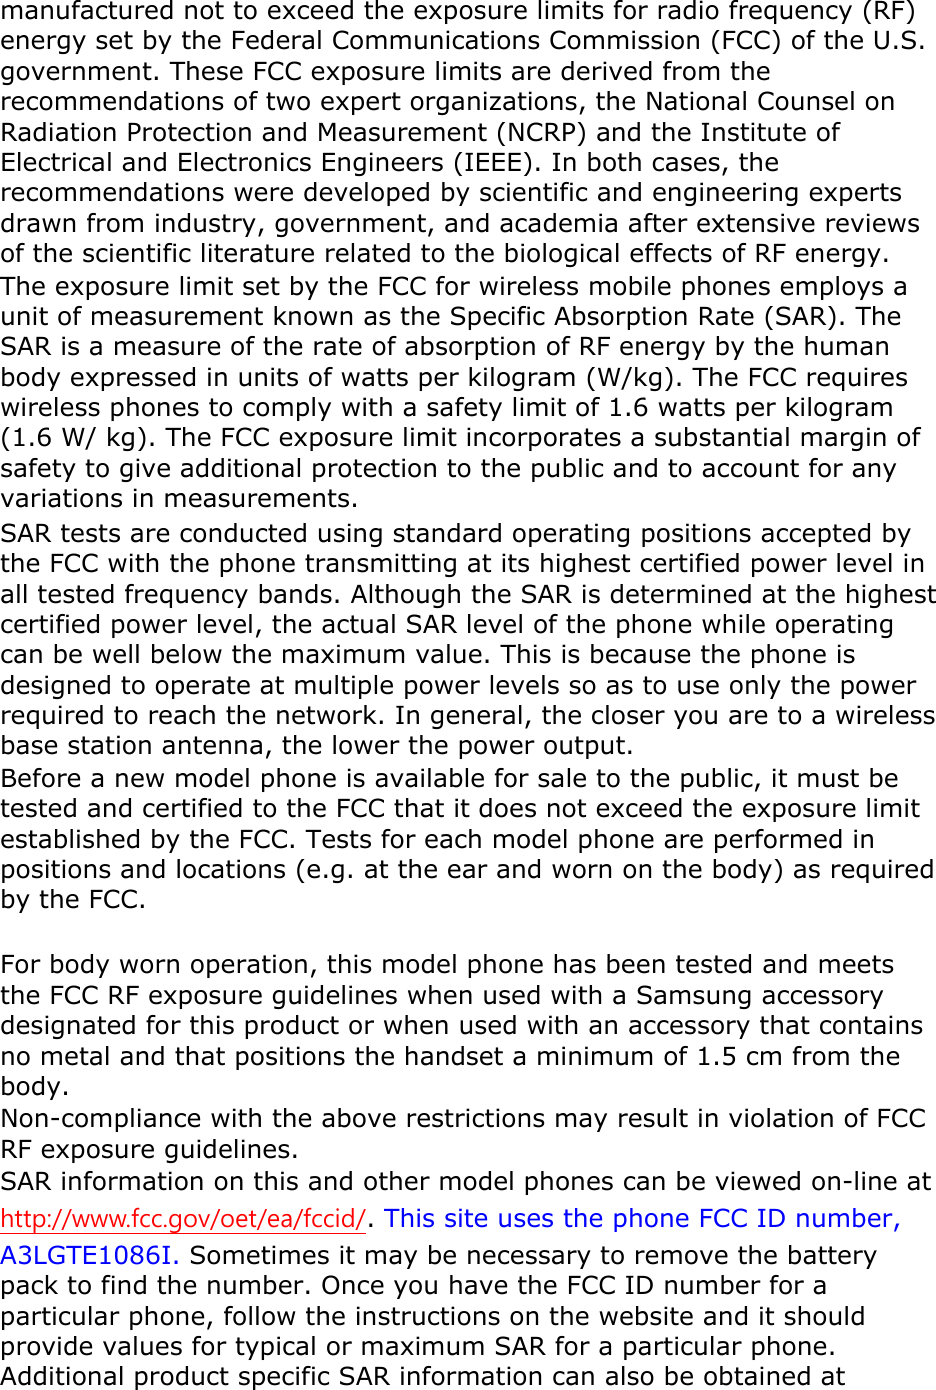 manufactured not to exceed the exposure limits for radio frequency (RF) energy set by the Federal Communications Commission (FCC) of the U.S. government. These FCC exposure limits are derived from the recommendations of two expert organizations, the National Counsel on Radiation Protection and Measurement (NCRP) and the Institute of Electrical and Electronics Engineers (IEEE). In both cases, the recommendations were developed by scientific and engineering experts drawn from industry, government, and academia after extensive reviews of the scientific literature related to the biological effects of RF energy. The exposure limit set by the FCC for wireless mobile phones employs a unit of measurement known as the Specific Absorption Rate (SAR). The SAR is a measure of the rate of absorption of RF energy by the human body expressed in units of watts per kilogram (W/kg). The FCC requires wireless phones to comply with a safety limit of 1.6 watts per kilogram (1.6 W/ kg). The FCC exposure limit incorporates a substantial margin of safety to give additional protection to the public and to account for any variations in measurements. SAR tests are conducted using standard operating positions accepted by the FCC with the phone transmitting at its highest certified power level in all tested frequency bands. Although the SAR is determined at the highest certified power level, the actual SAR level of the phone while operating can be well below the maximum value. This is because the phone is designed to operate at multiple power levels so as to use only the power required to reach the network. In general, the closer you are to a wireless base station antenna, the lower the power output. Before a new model phone is available for sale to the public, it must be tested and certified to the FCC that it does not exceed the exposure limit established by the FCC. Tests for each model phone are performed in positions and locations (e.g. at the ear and worn on the body) as required by the FCC.      For body worn operation, this model phone has been tested and meets the FCC RF exposure guidelines when used with a Samsung accessory designated for this product or when used with an accessory that contains no metal and that positions the handset a minimum of 1.5 cm from the body.  Non-compliance with the above restrictions may result in violation of FCC RF exposure guidelines. SAR information on this and other model phones can be viewed on-line at http://www.fcc.gov/oet/ea/fccid/. This site uses the phone FCC ID number, A3LGTE1086I. Sometimes it may be necessary to remove the battery pack to find the number. Once you have the FCC ID number for a particular phone, follow the instructions on the website and it should provide values for typical or maximum SAR for a particular phone. Additional product specific SAR information can also be obtained at 